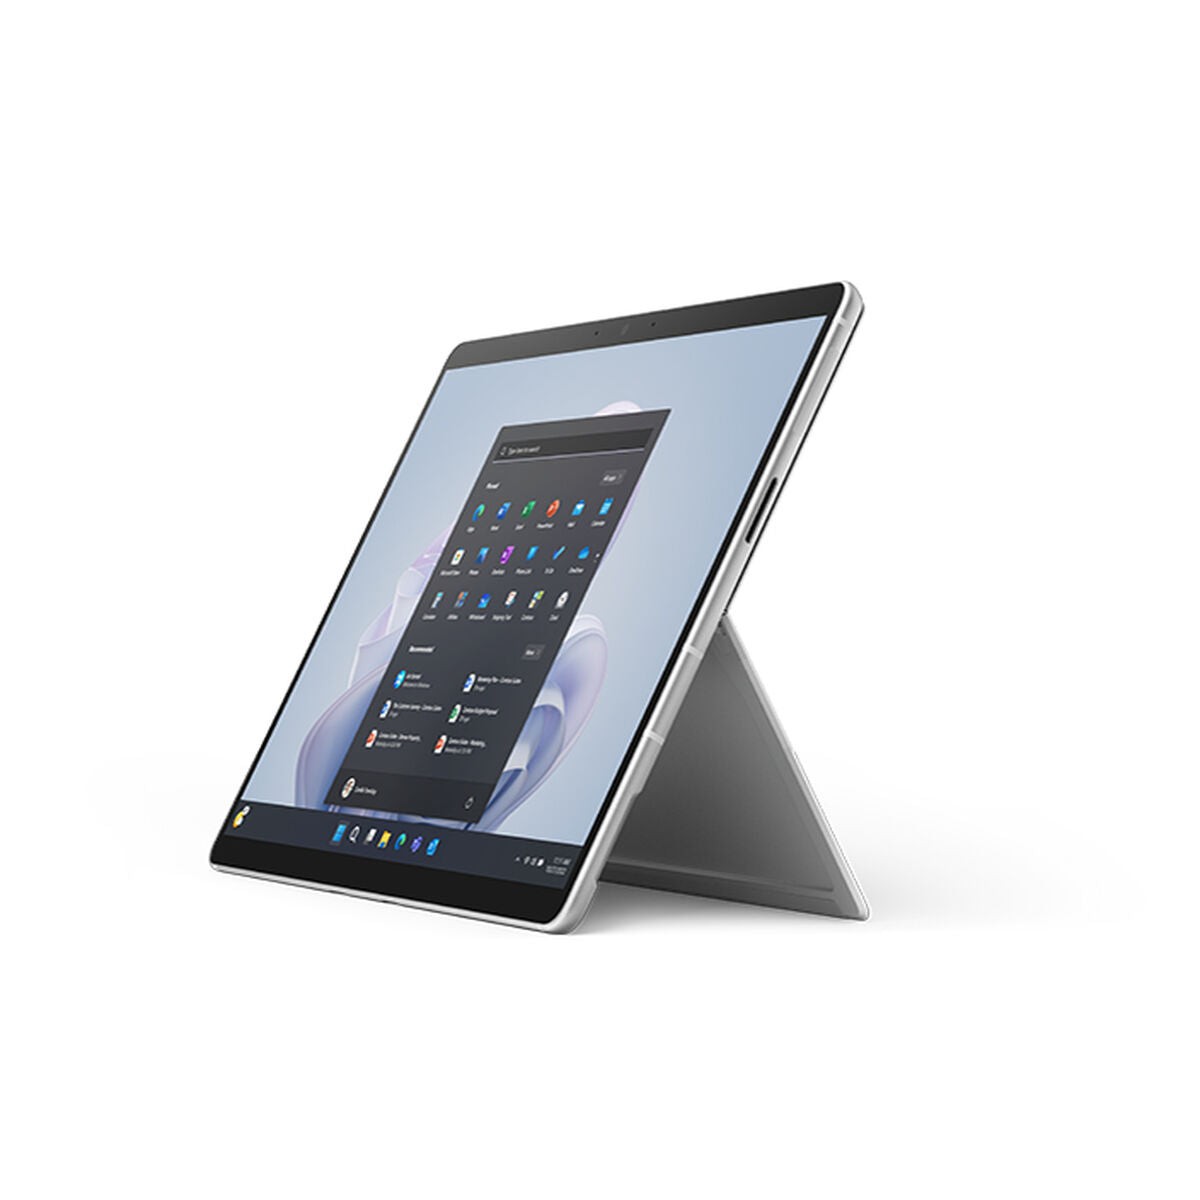 Tablet Microsoft SURFACE PRO 9 16 GB RAM 13" 512 GB, Microsoft, Computing, tablet-microsoft-surface-pro-9-16-gb-ram-13-512-gb, :256 GB, :512 GB, :RAM 16 GB, Brand_Microsoft, category-reference-2609, category-reference-2617, category-reference-2626, category-reference-t-19685, Condition_NEW, Price_+ 1000, telephones & tablets, Teleworking, RiotNook